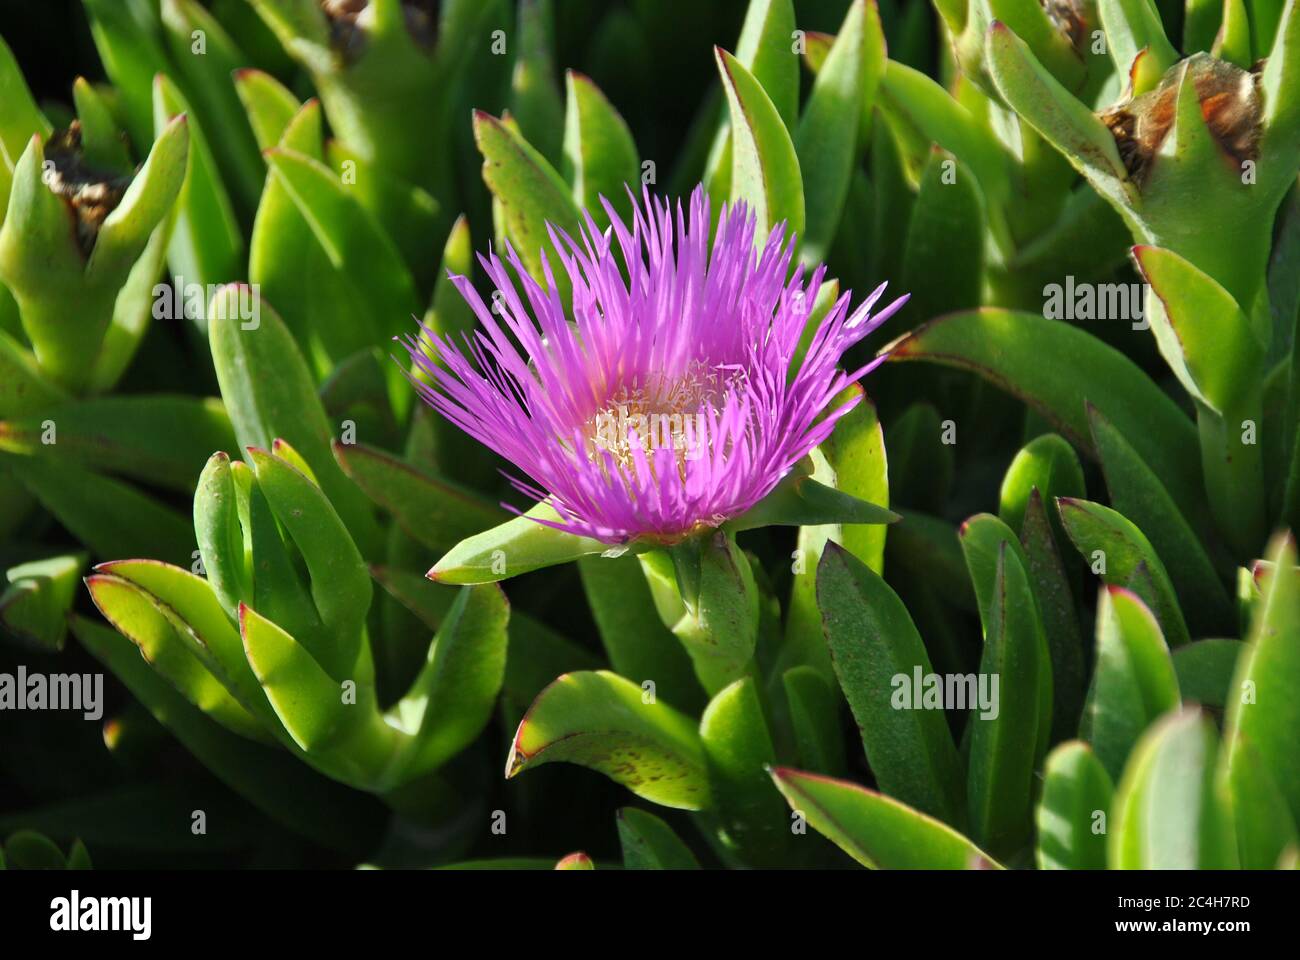 Carpobrotus edulis (pink colored flower) is a ground-creeping plant with succulent leaves in the genus Carpobrotus, native to South Africa. Hottentot- Stock Photo